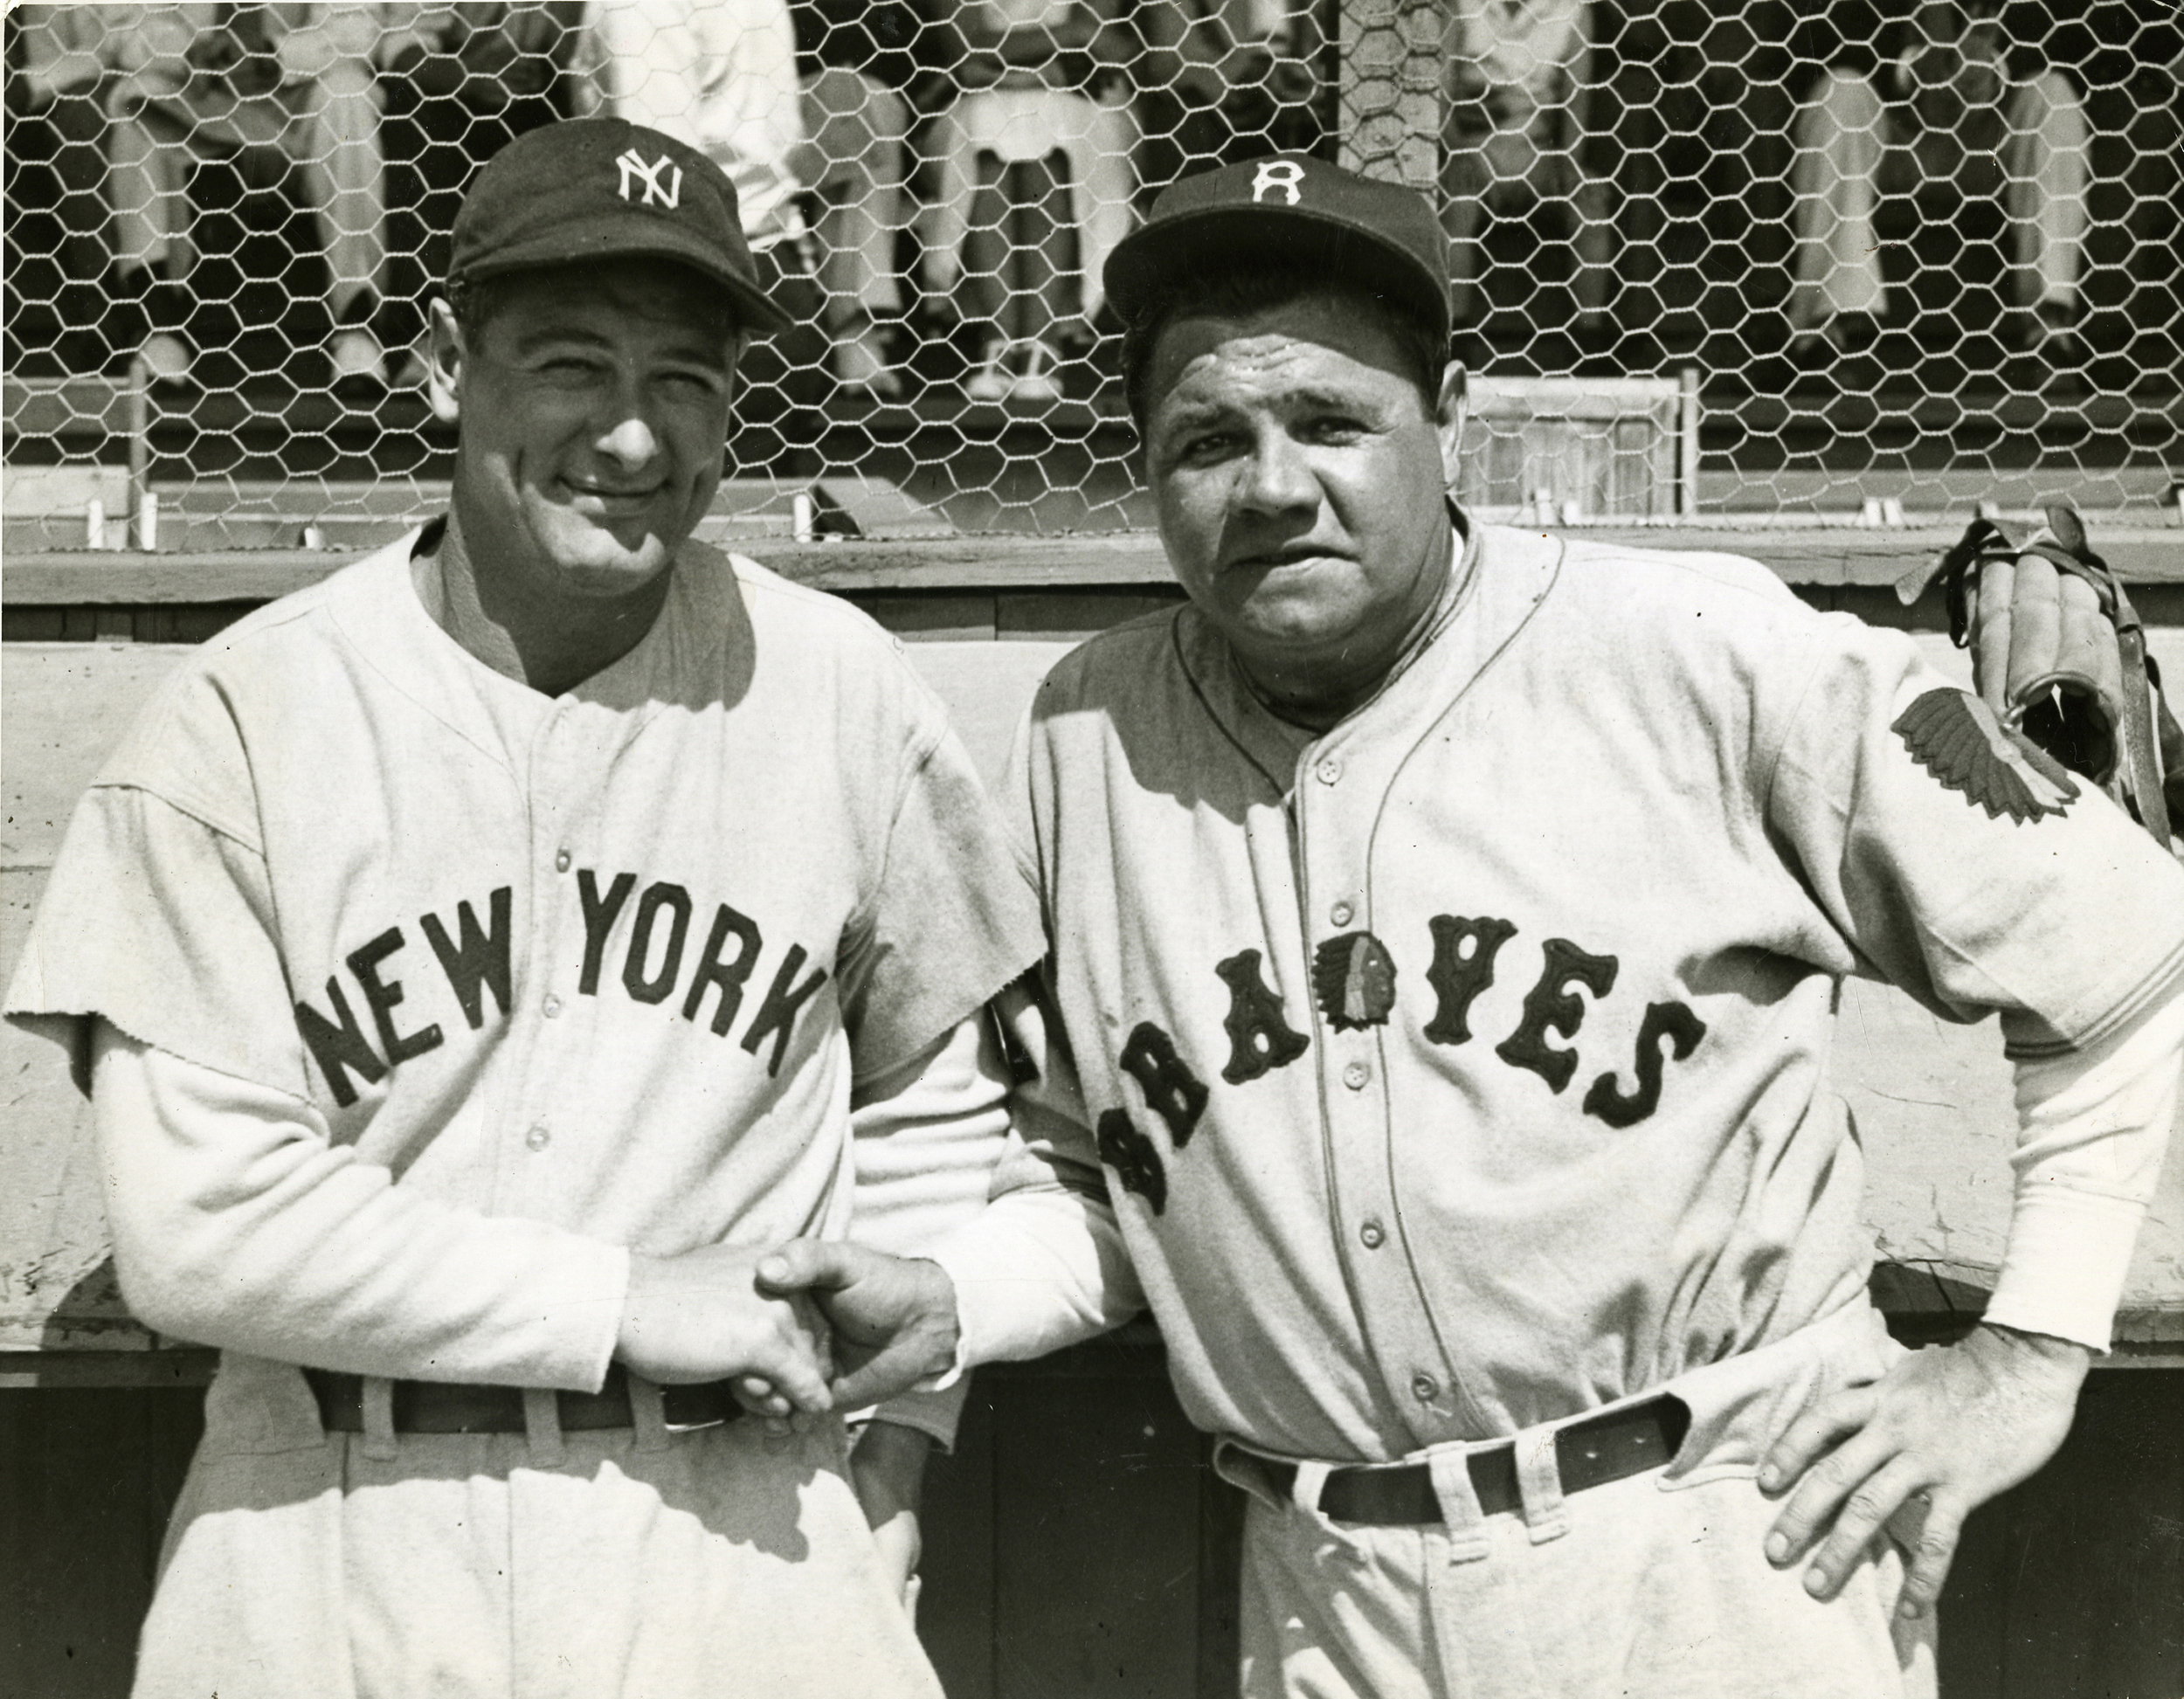 Lou Gehrig - Baseball's Iron Horse & The 1937 Campaign